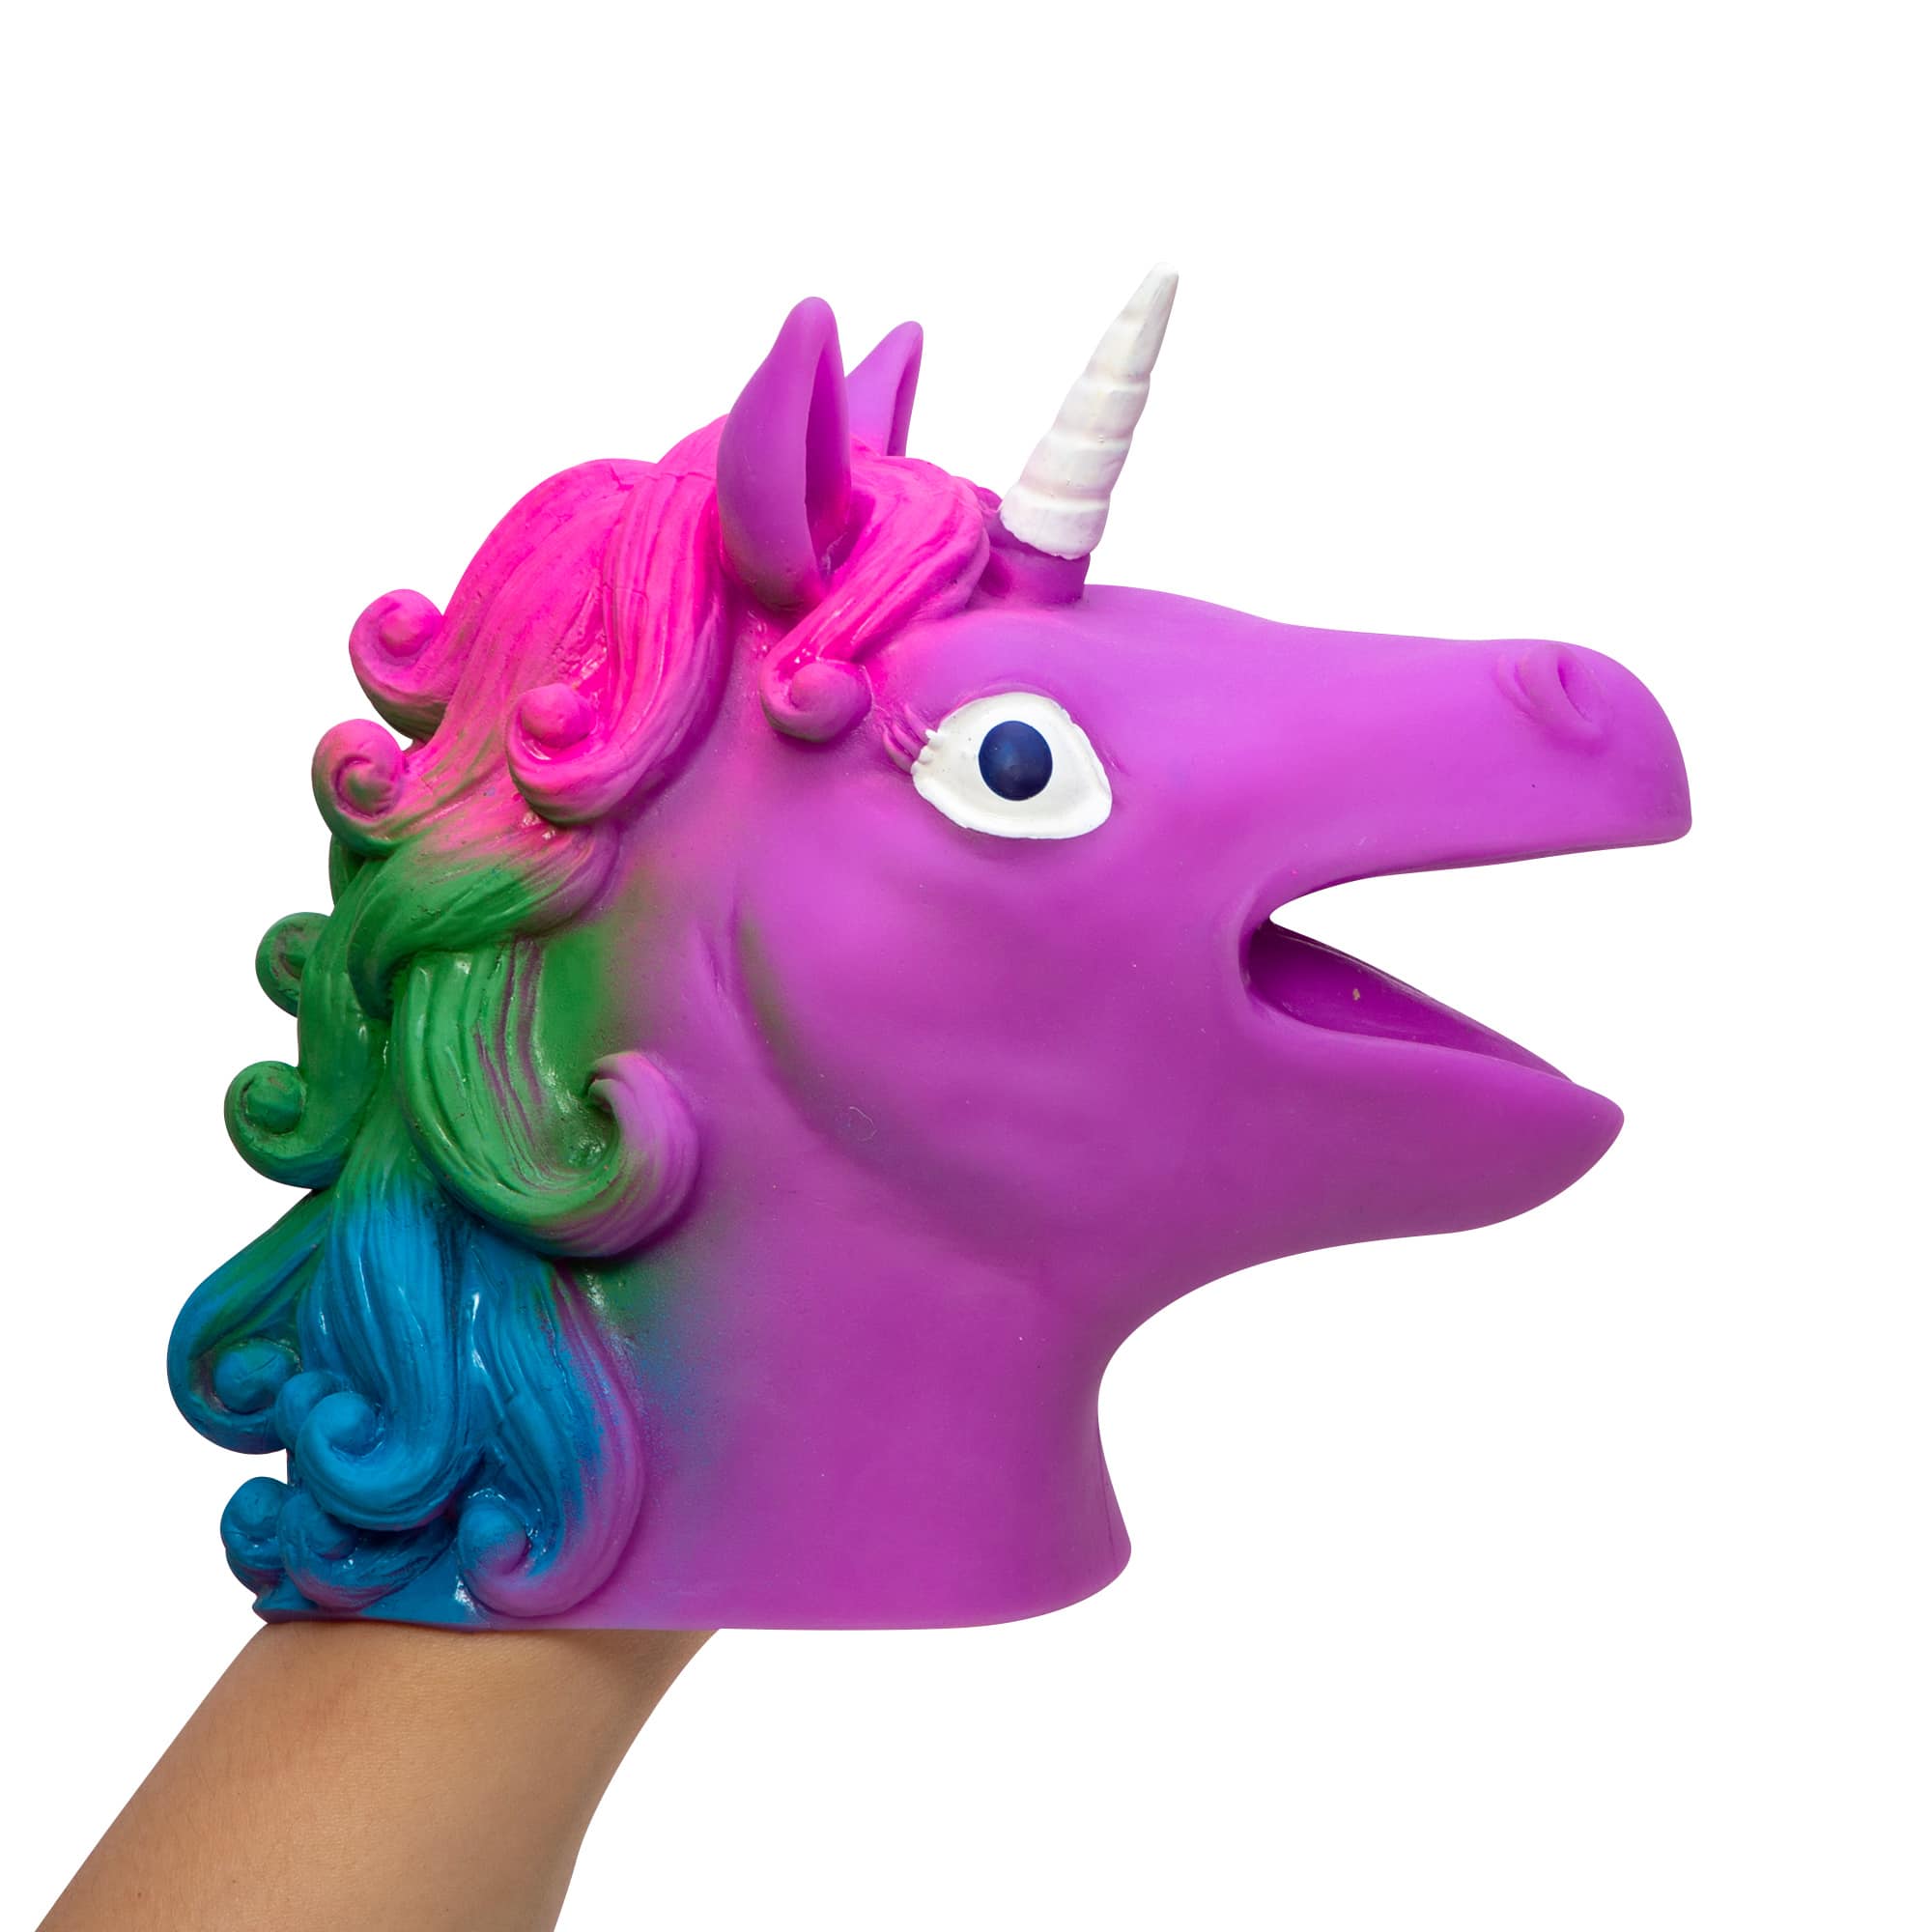 NV304 IMAGINATIVE SILICONE PUPPETS MAGICAL KIDS FUN TOY UNICORN HAND PUPPET 